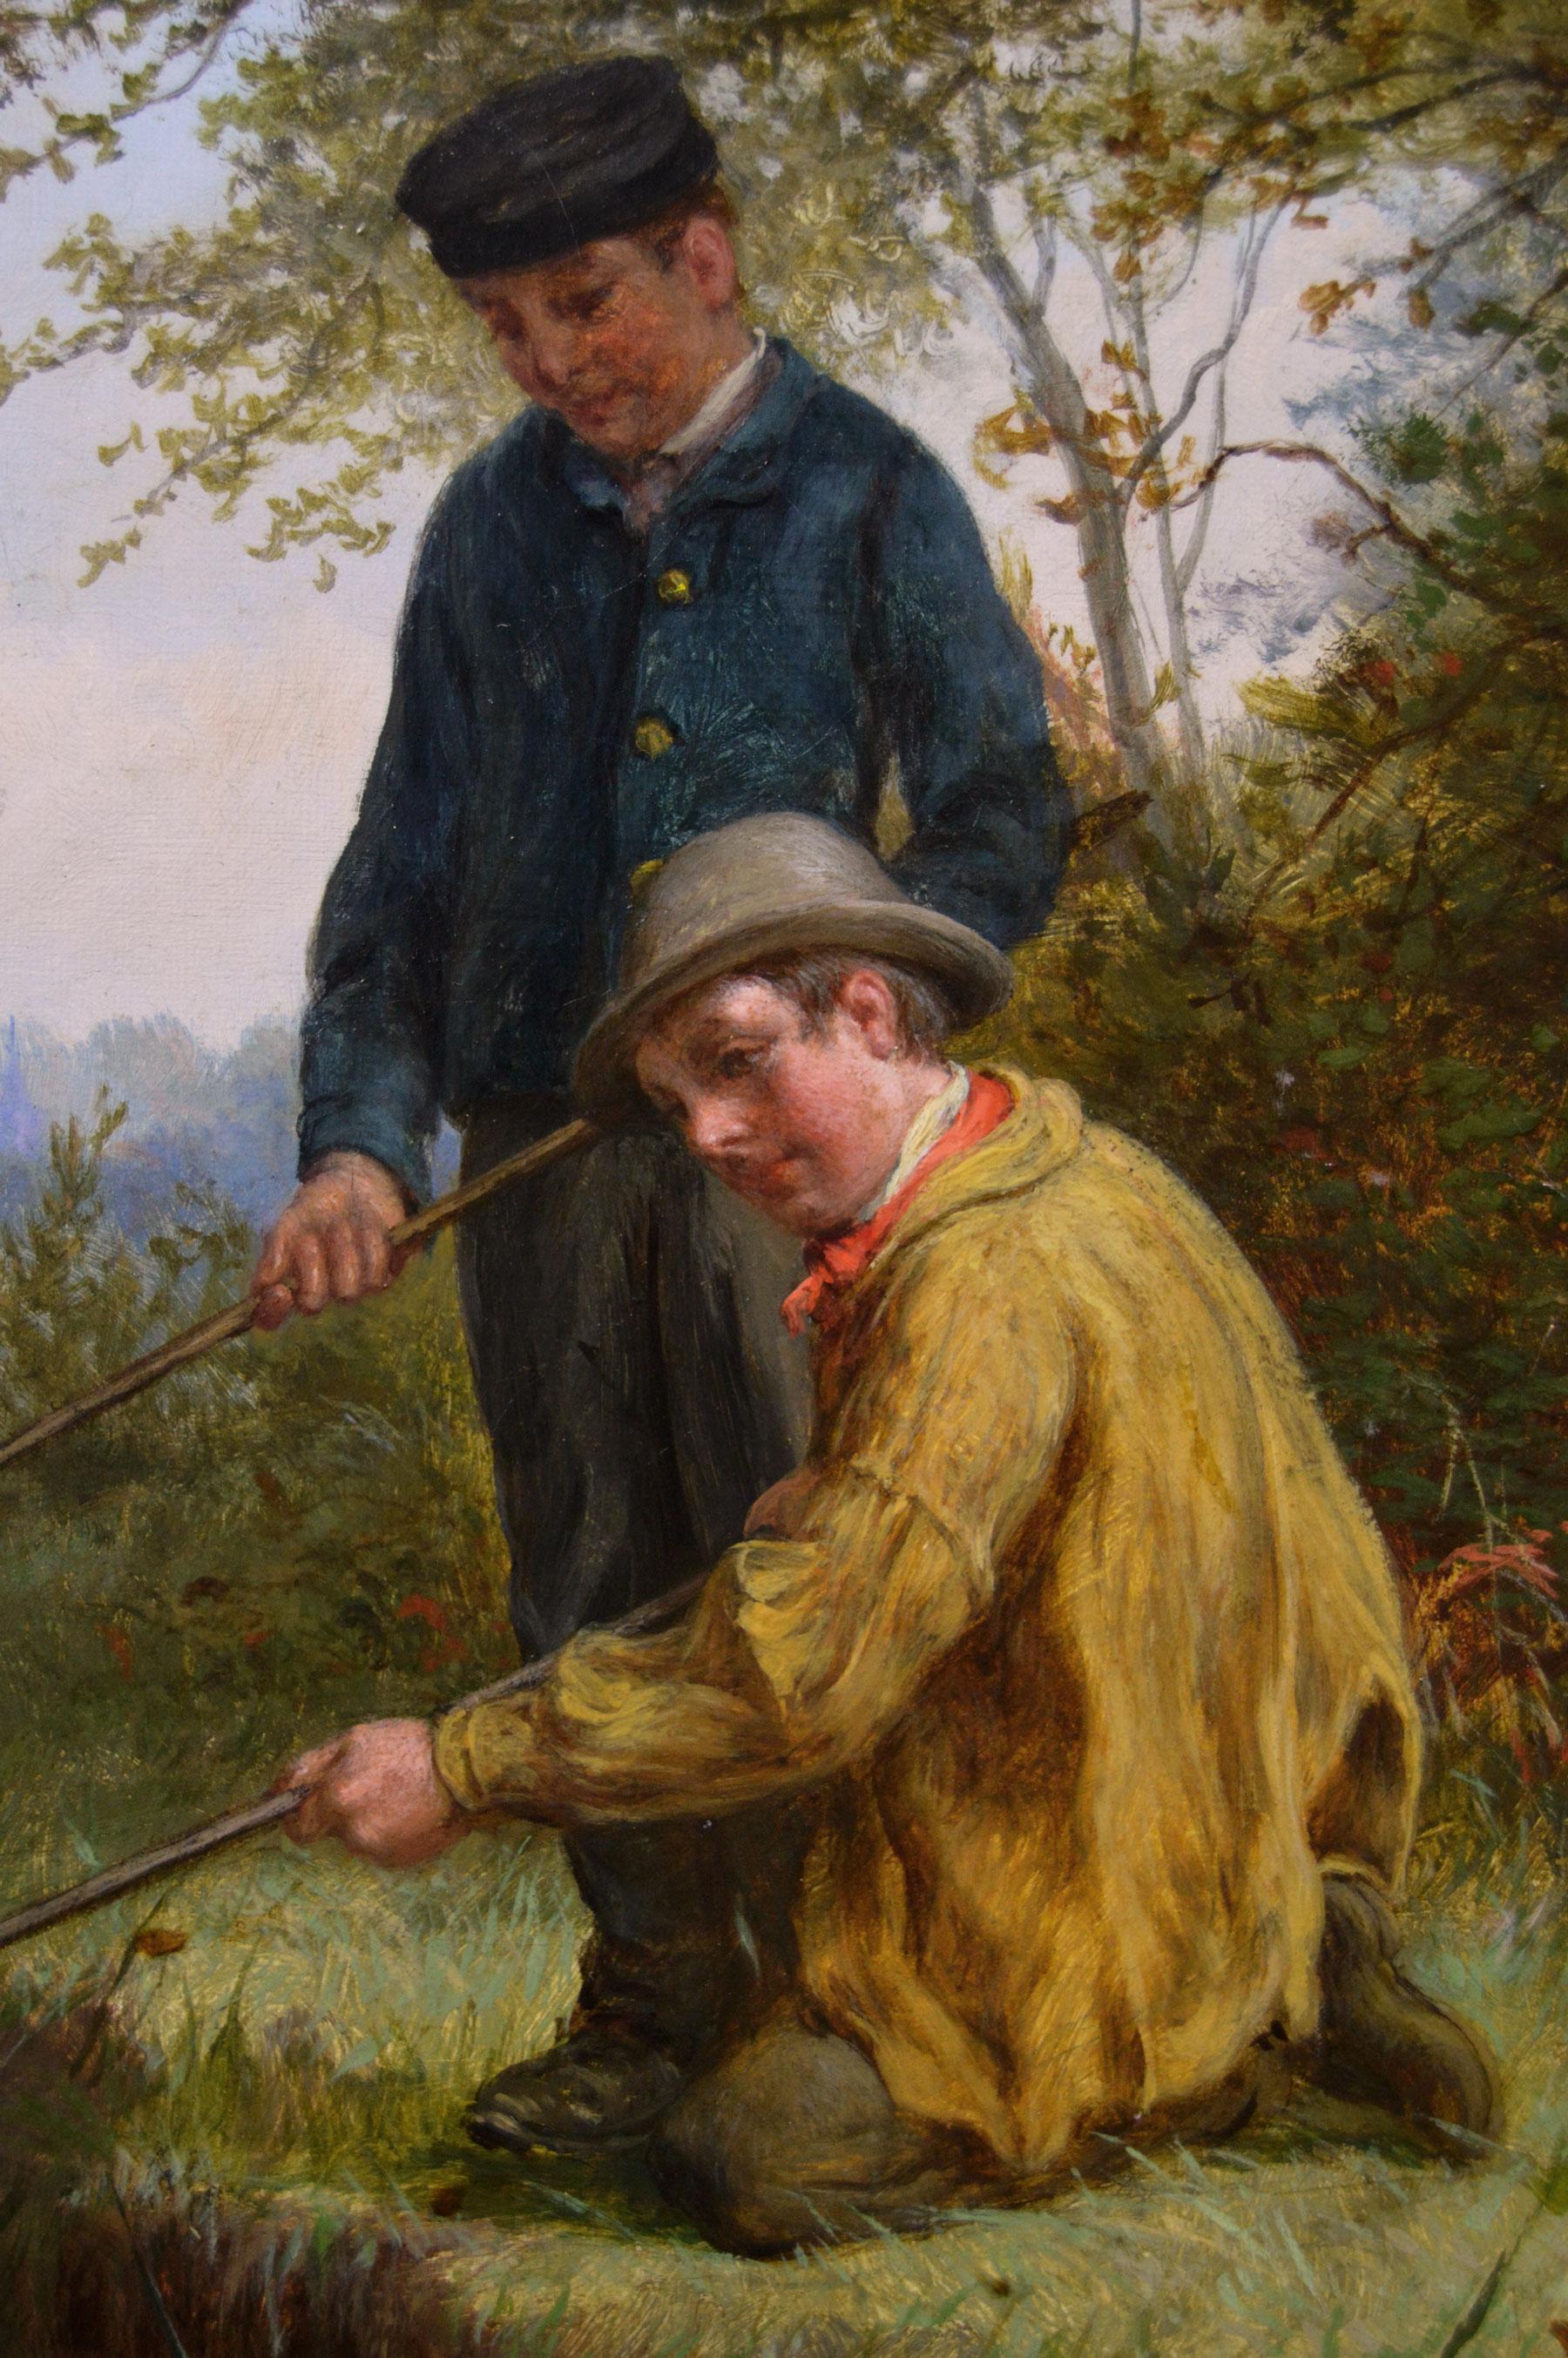 William Bromley 
British, (1816-1890)
Gone Fishing
Oil on canvas, signed 
Image size: 13.5 inches x 17.5 inches 
Size including frame: 18.75 inches x 22.75 inches

A picturesque genre painting by William Bromley of three young anglers next to a